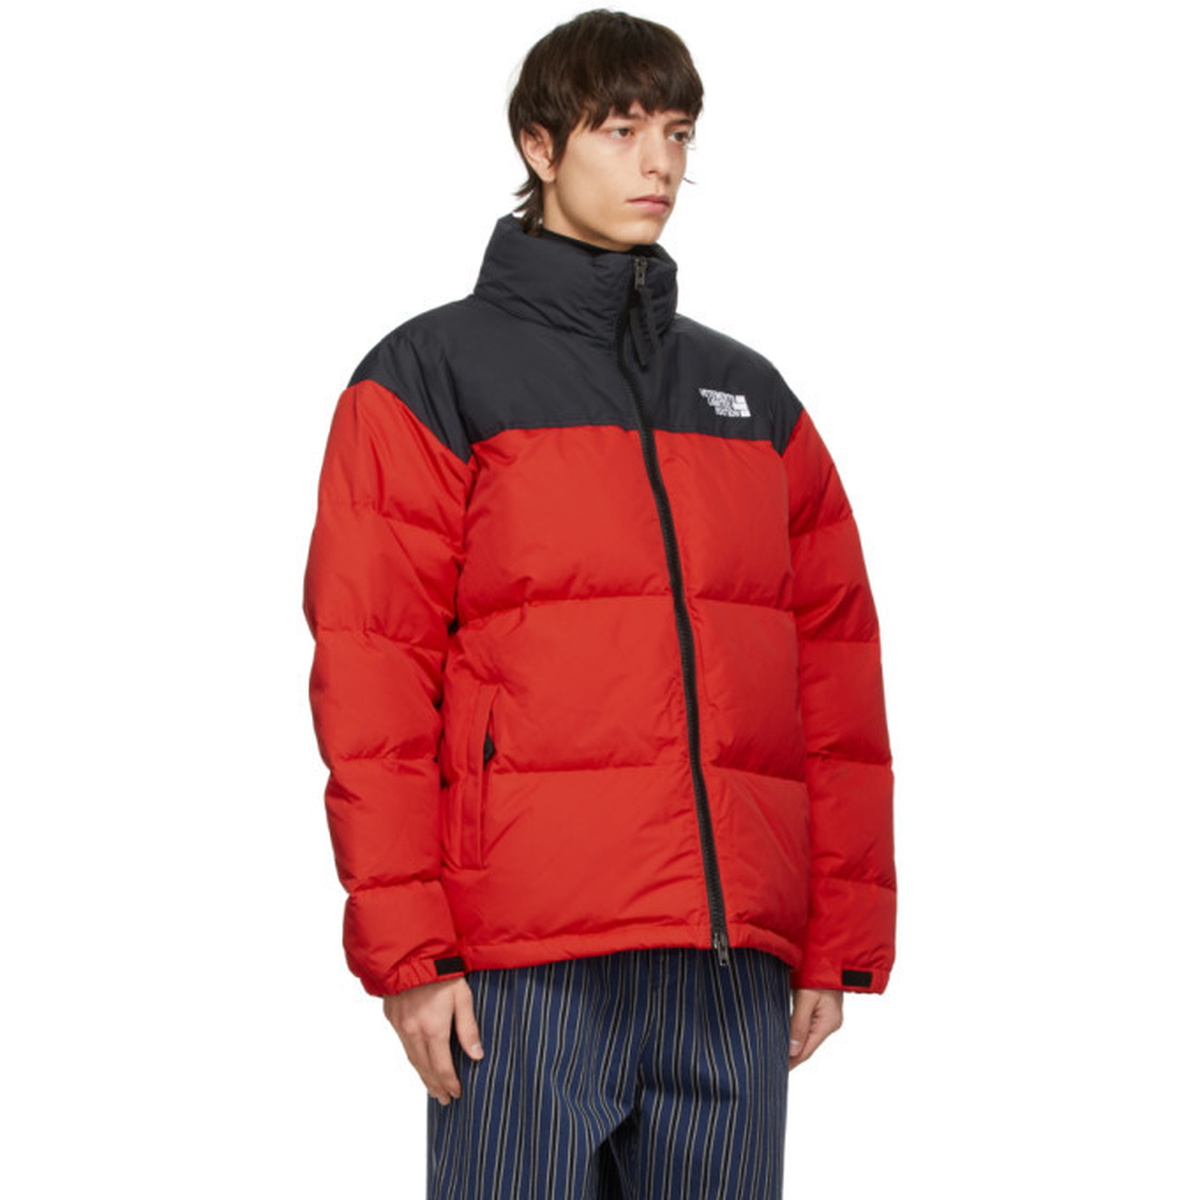 VETEMENTS Black and Red Limited Edition Puffer Jacket Vetements